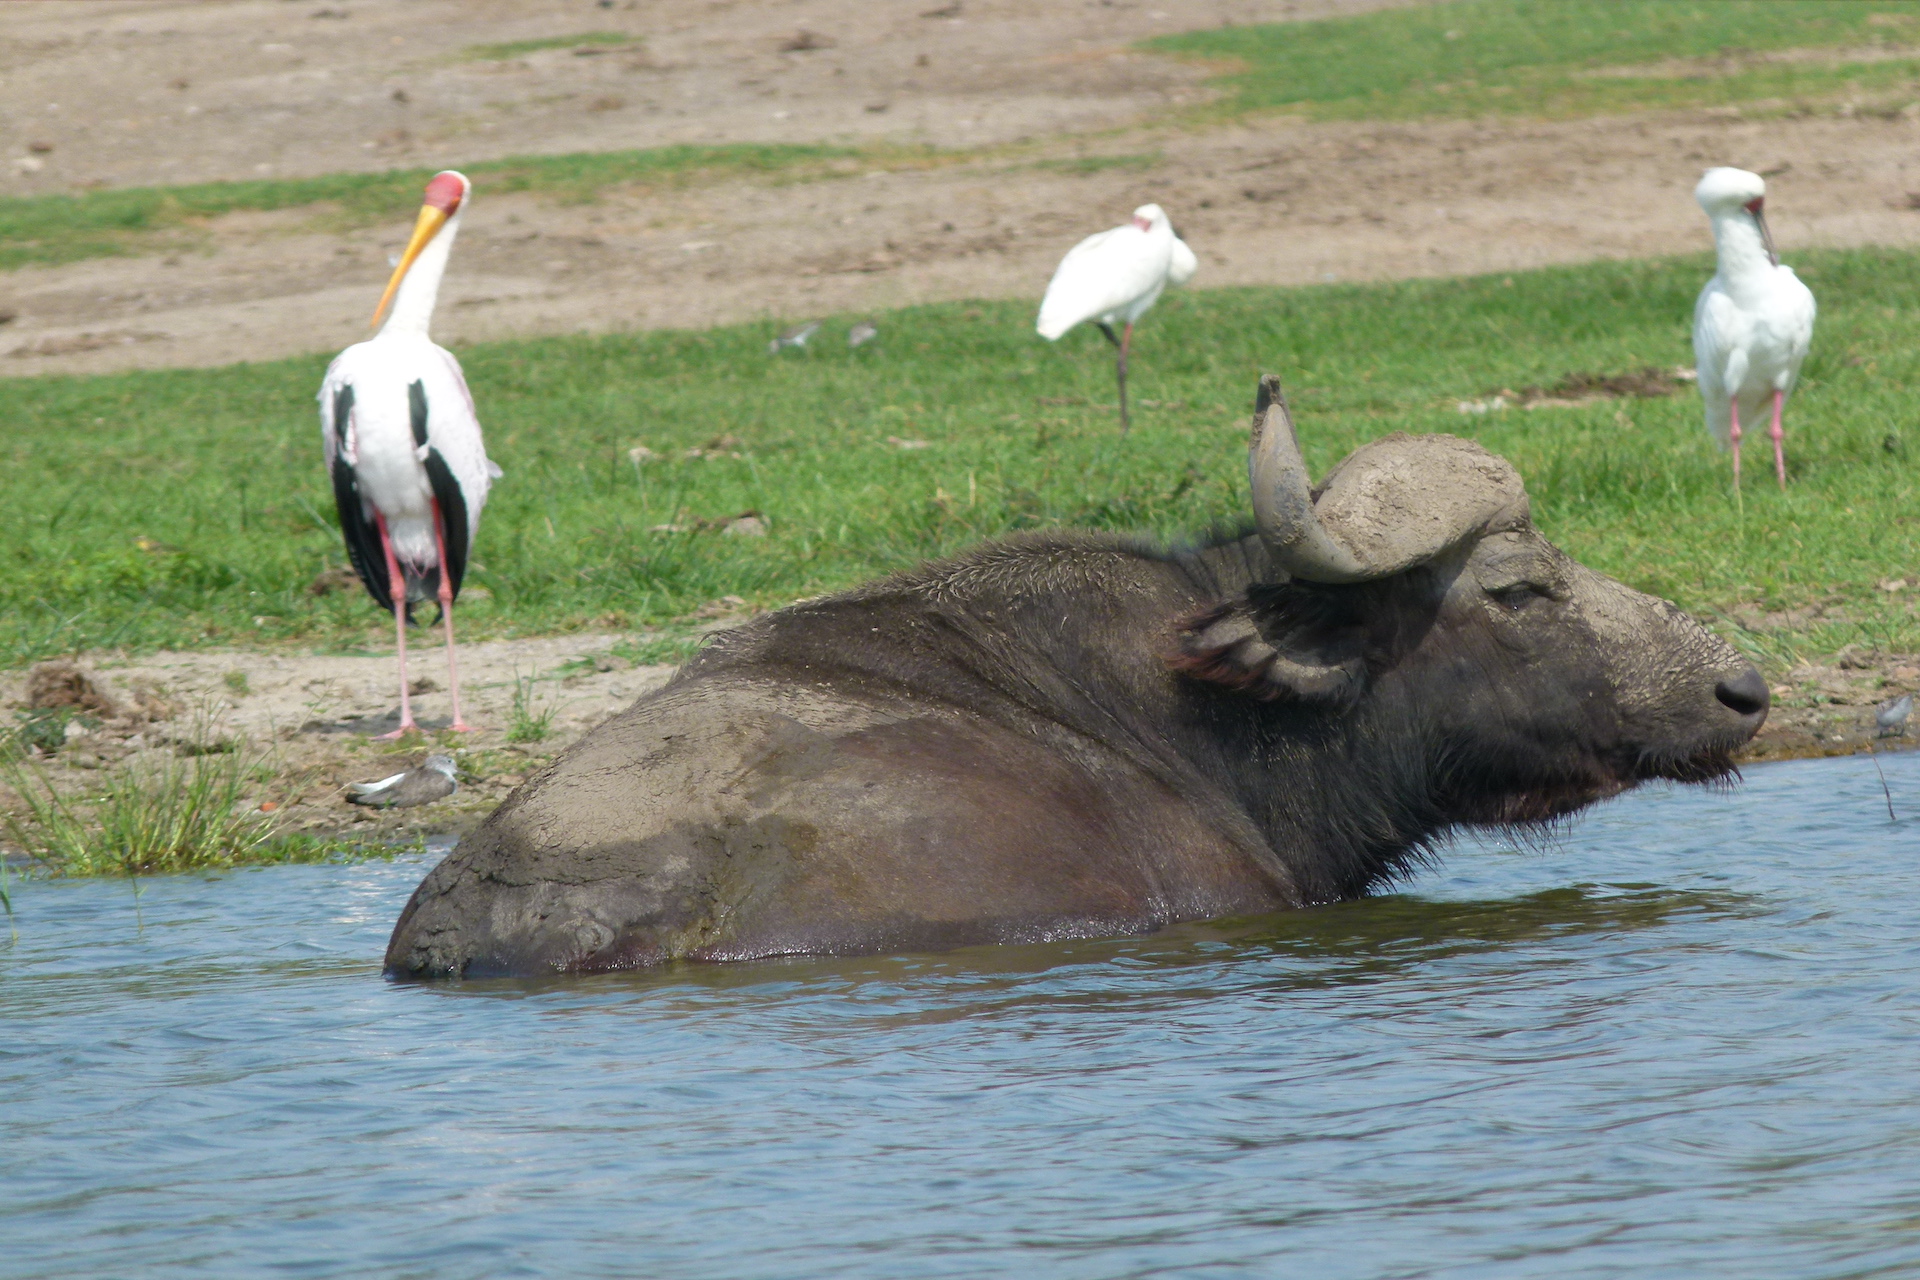 The Best Uganda has to offer with World Adventure Tours